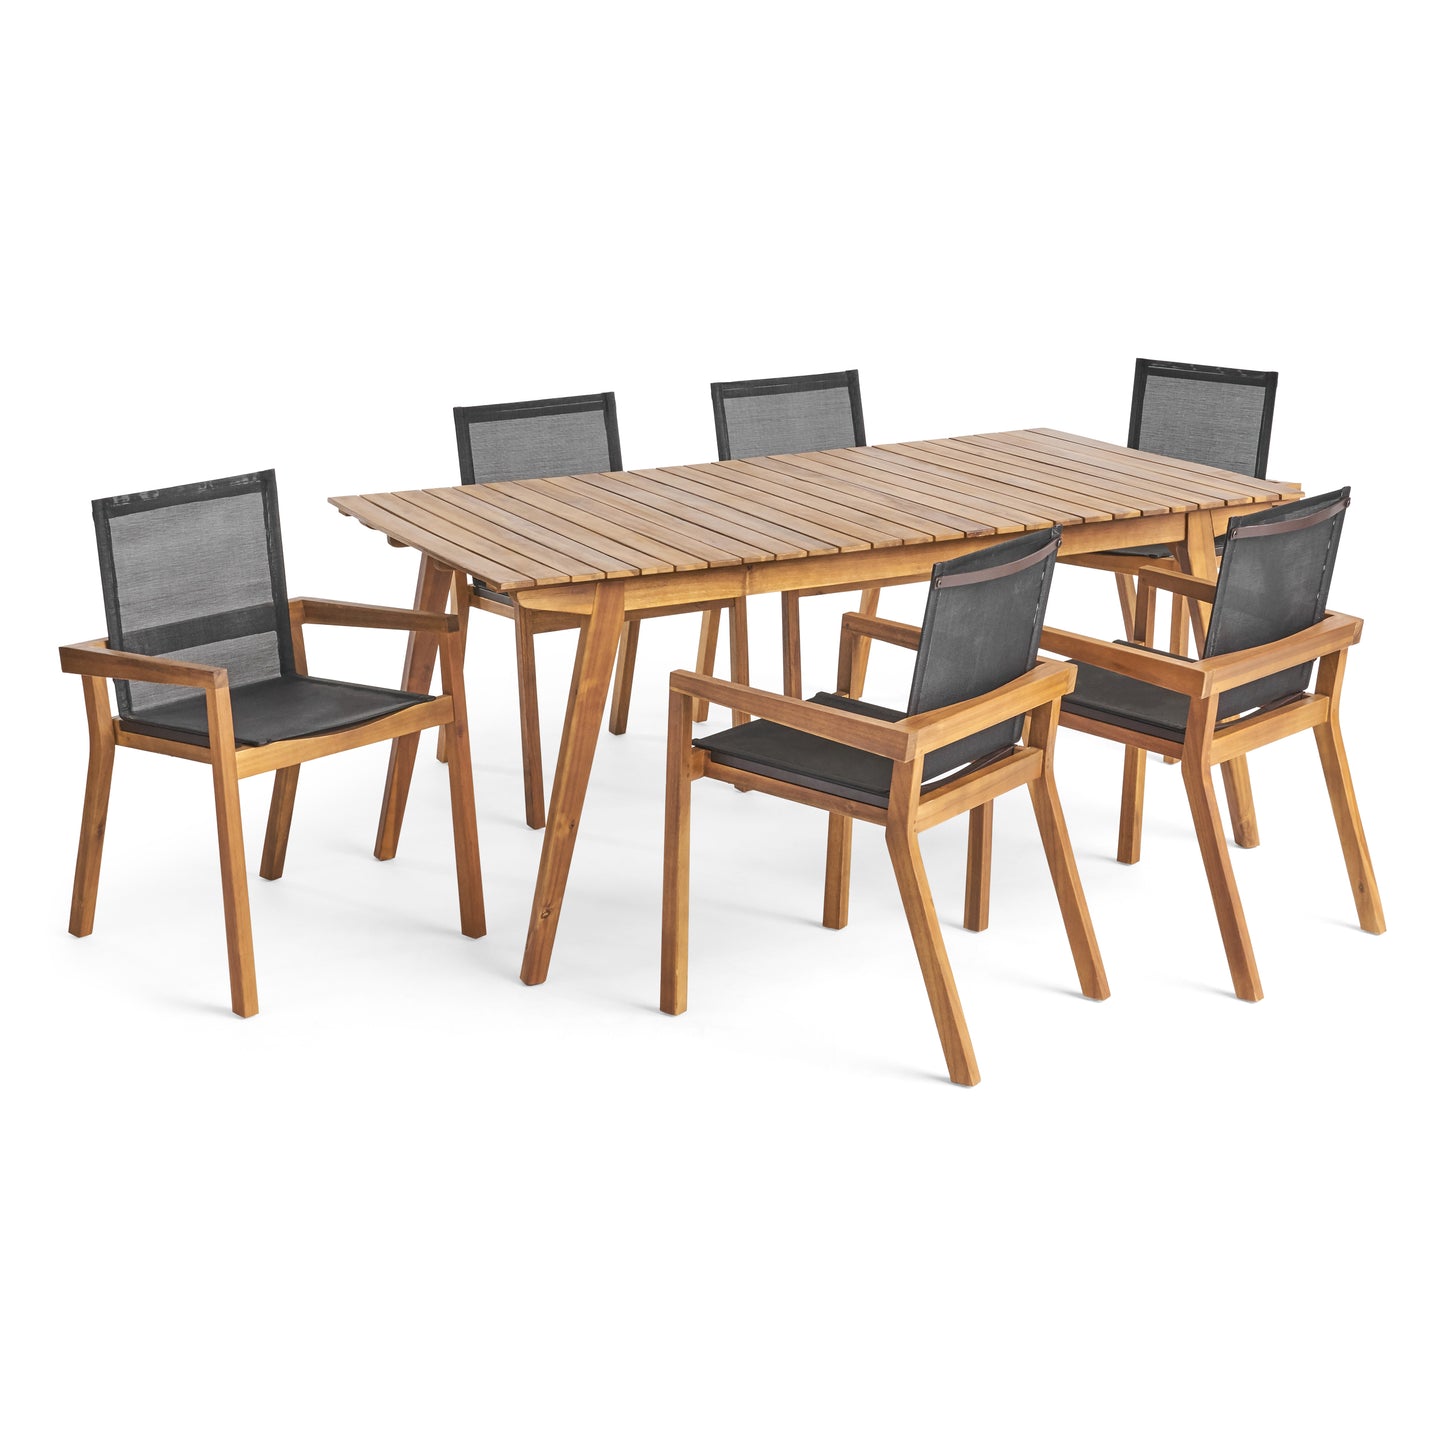 Janely Outdoor Acacia Wood 7 Piece Dining Set with Mesh Seats